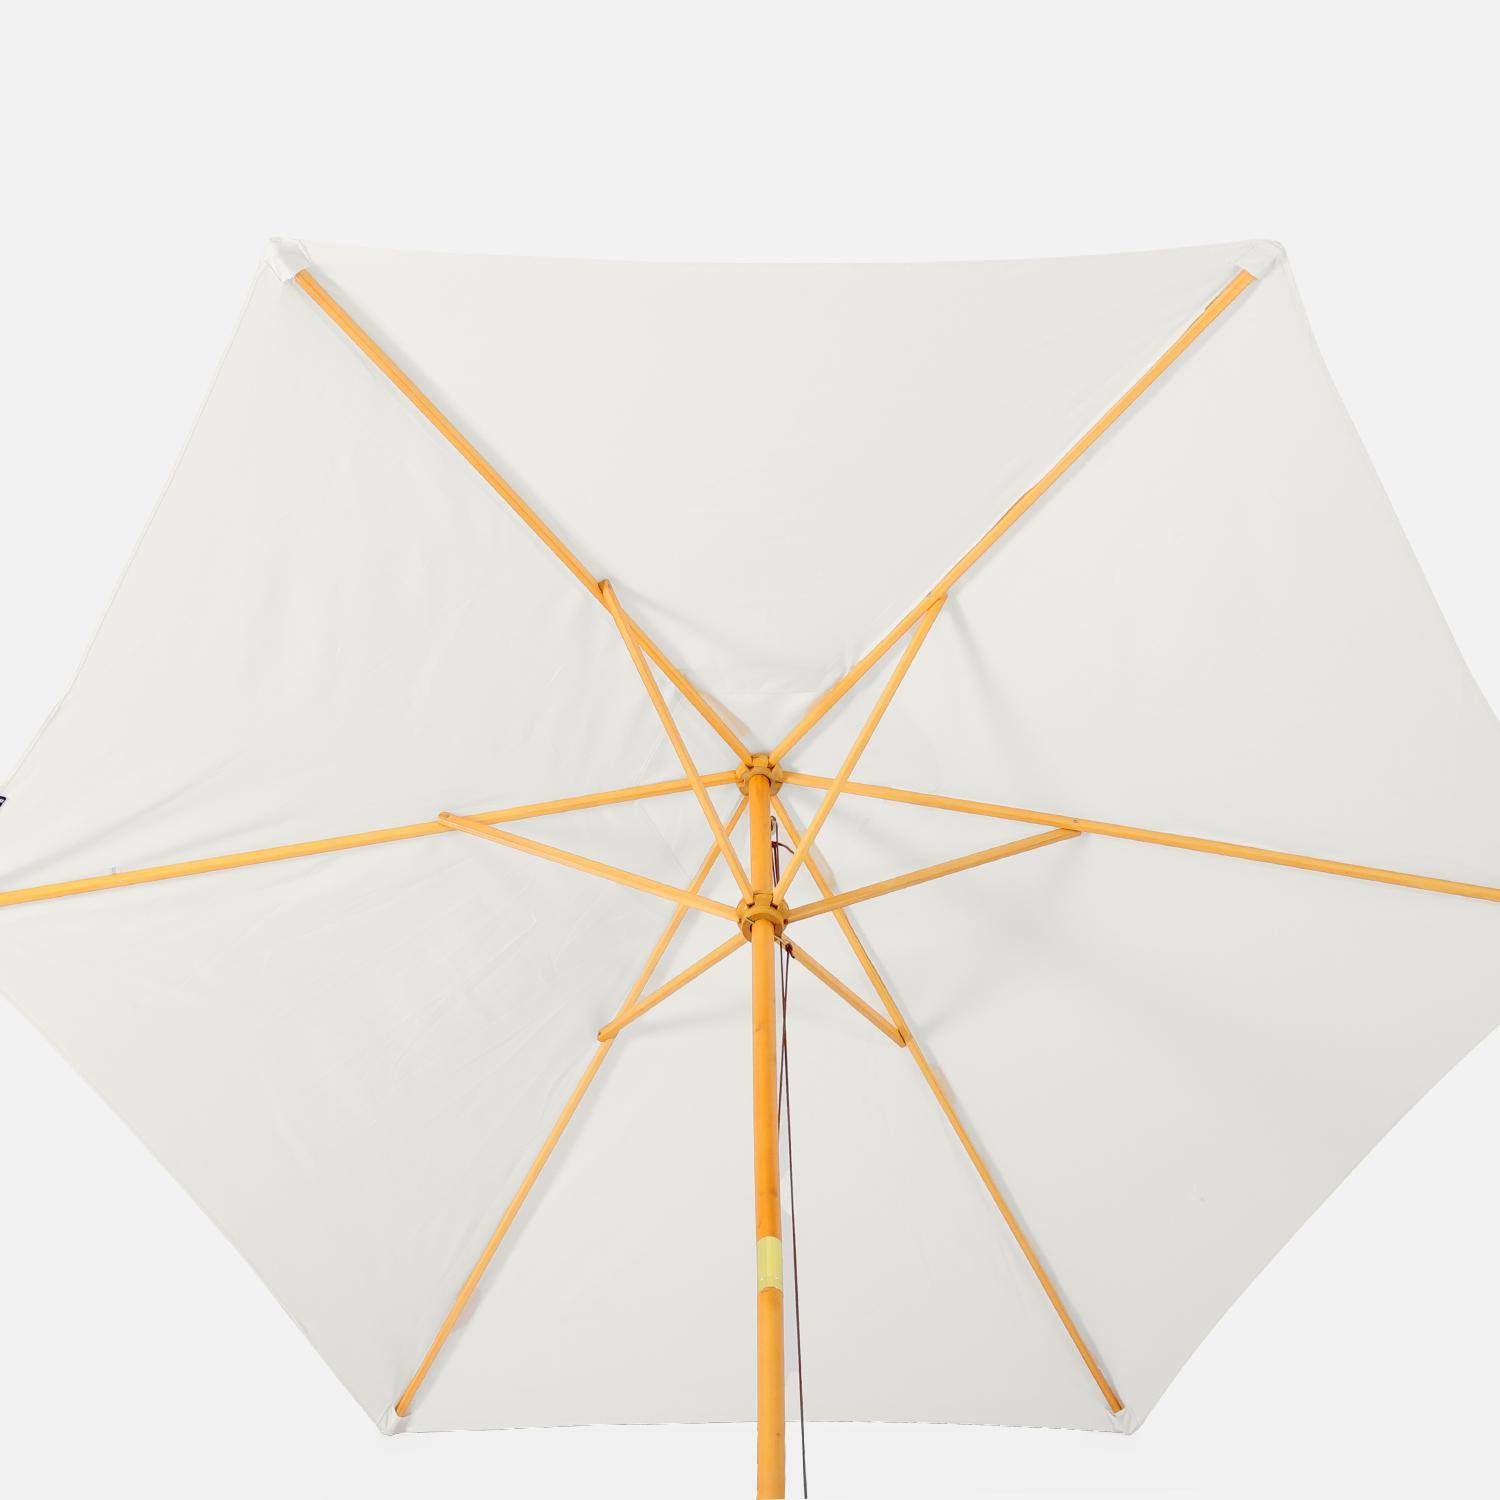 Round wooden parasol Ø300cm with straight pole -  adjustable aluminium central mast in wood and crank handle opening - Cabourg - Off-white Photo3